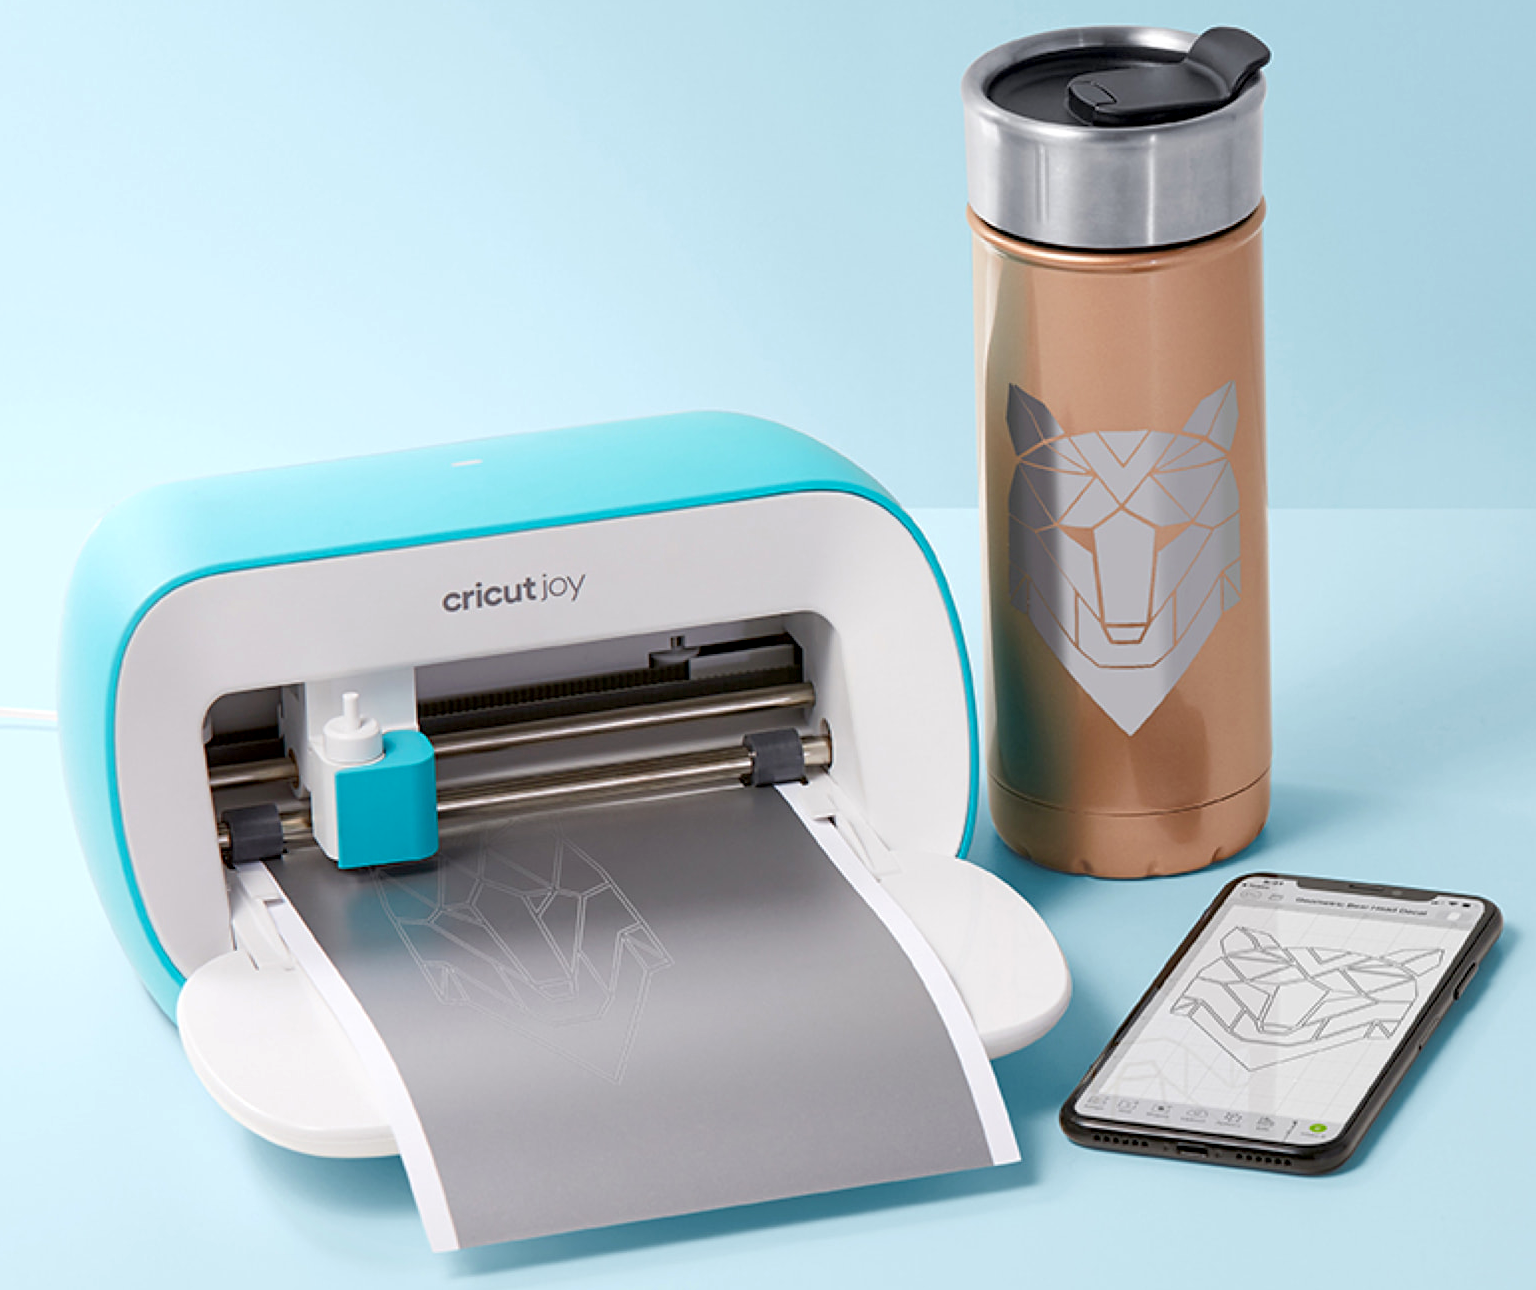 Cricut joy cutting a silver decal with insulated mug and phone